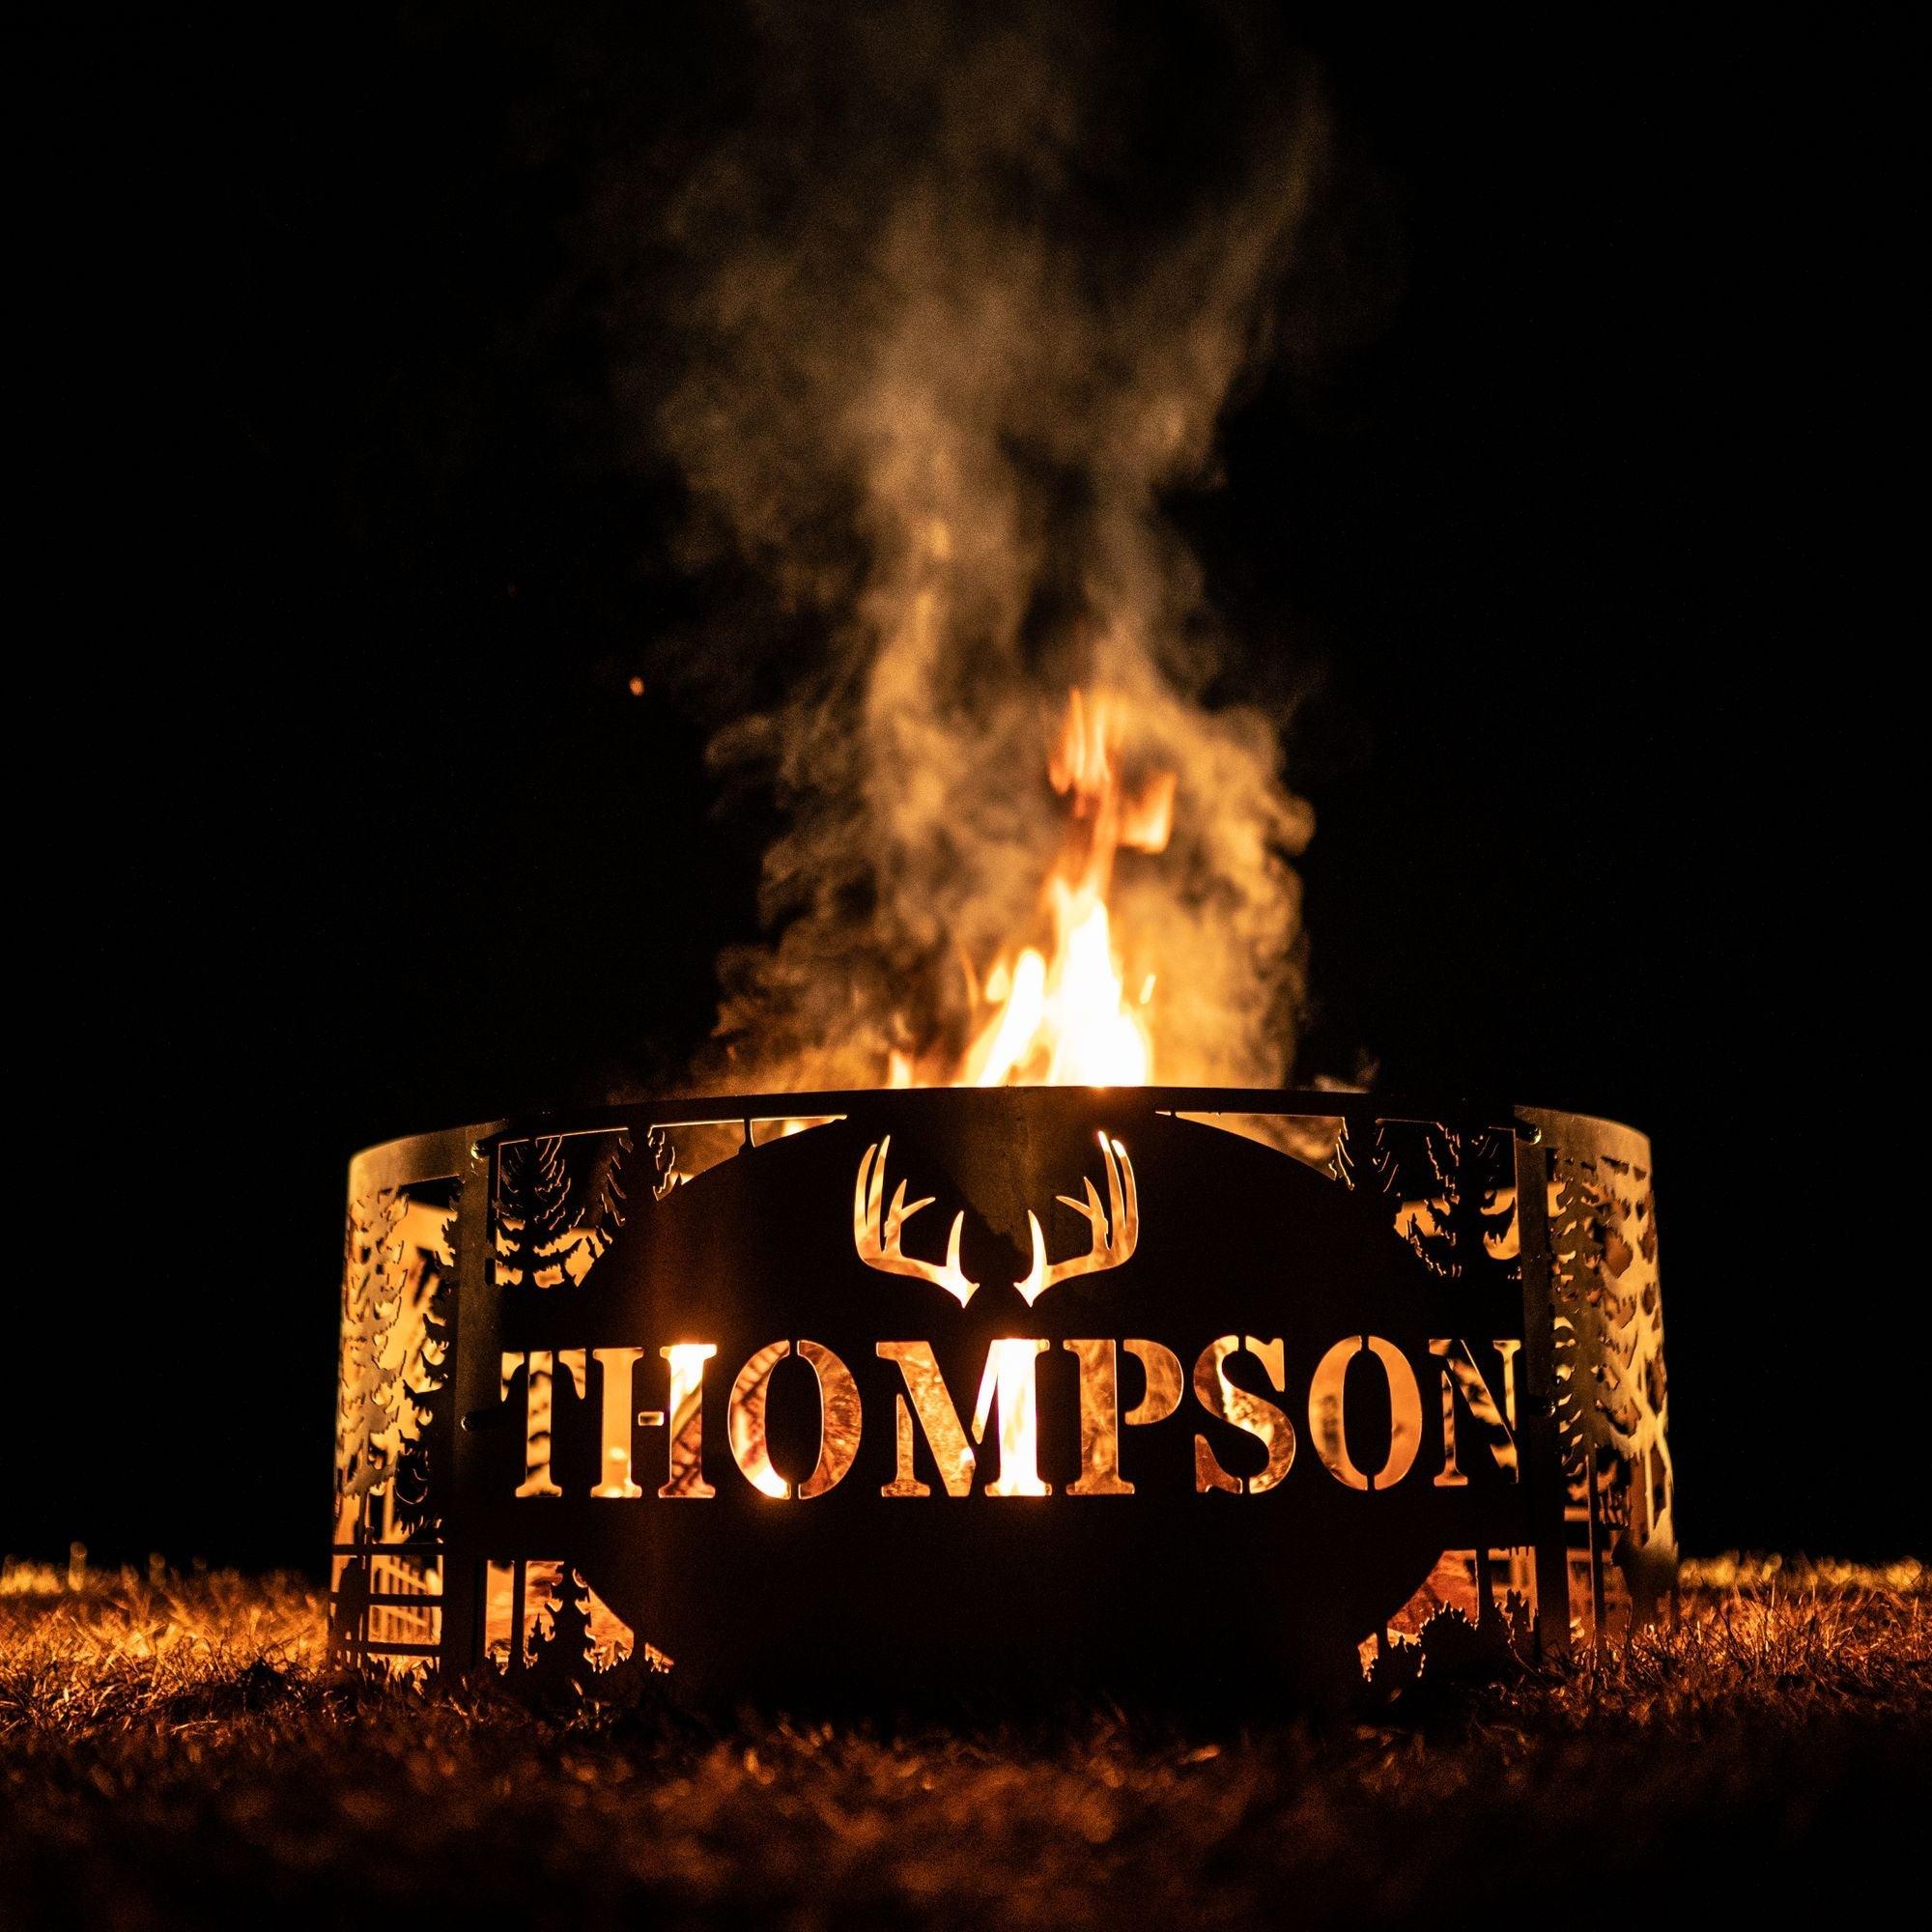 Personalized LOGO Fire Pit Ring - Cool Metal Signs